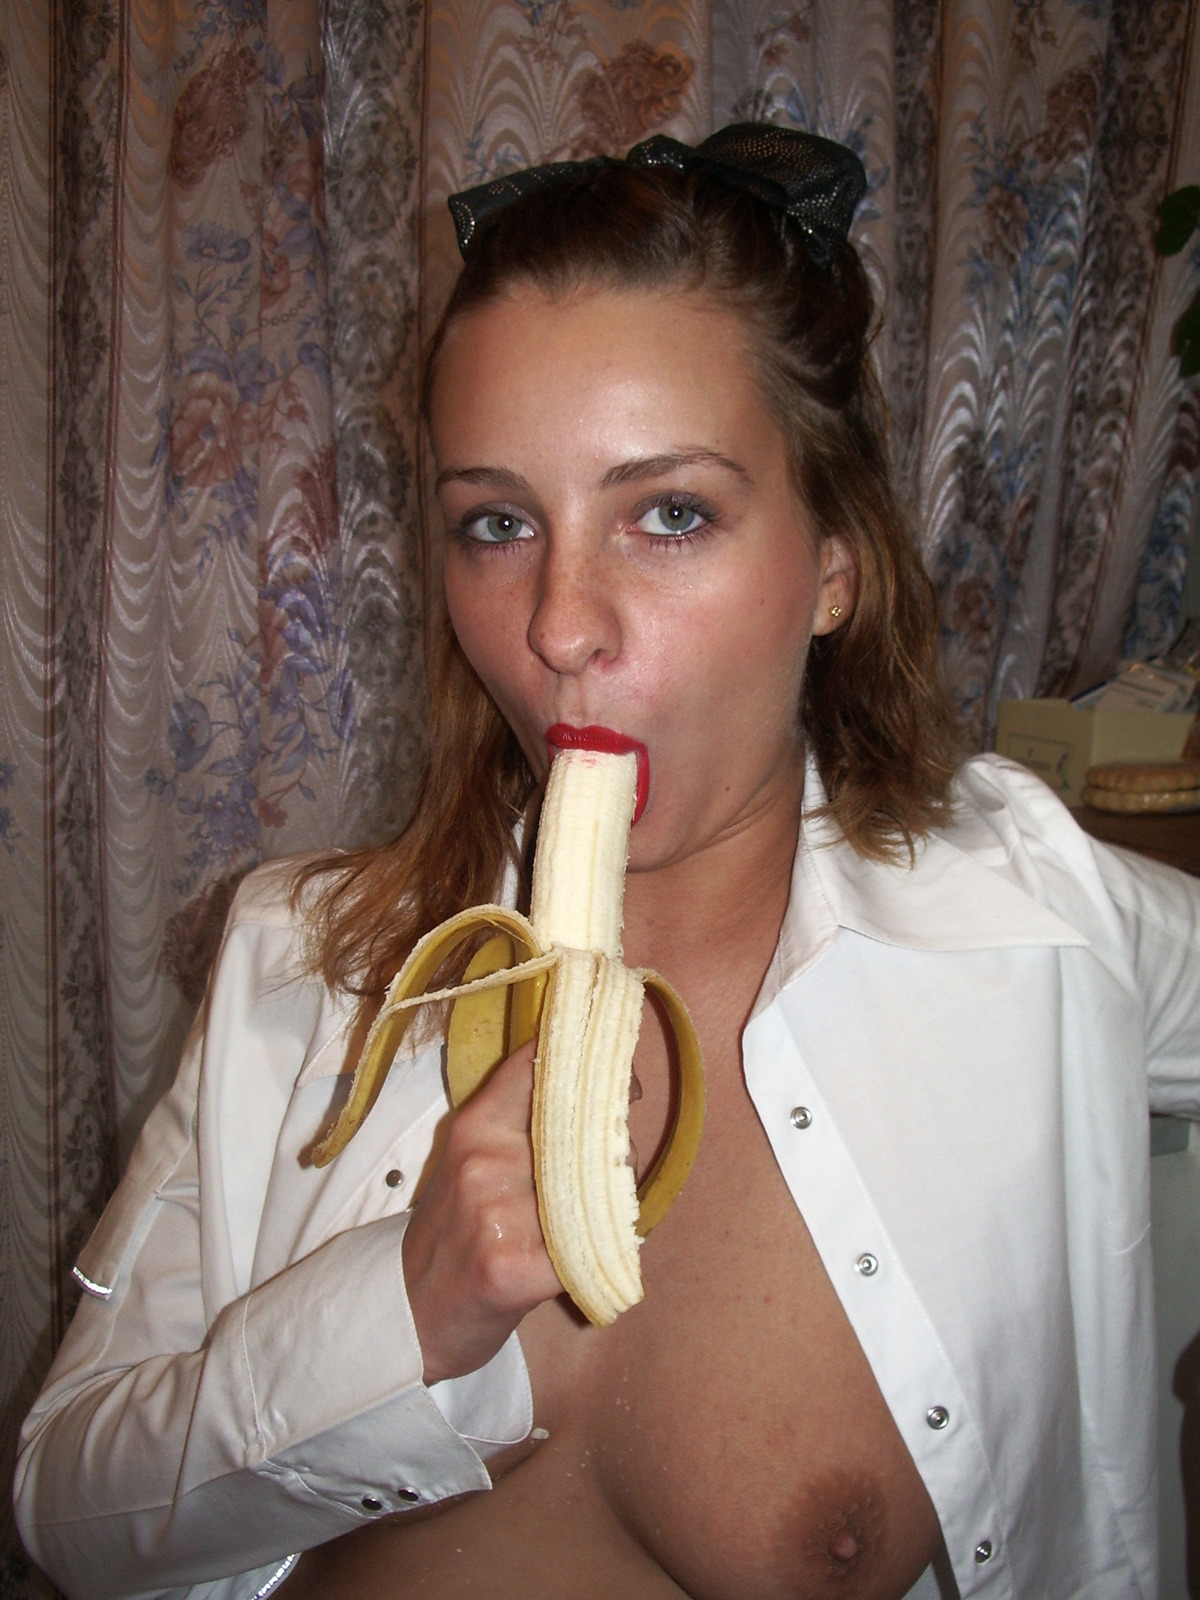 Sexy Amateur Babe Sucking a Banana - picture 05